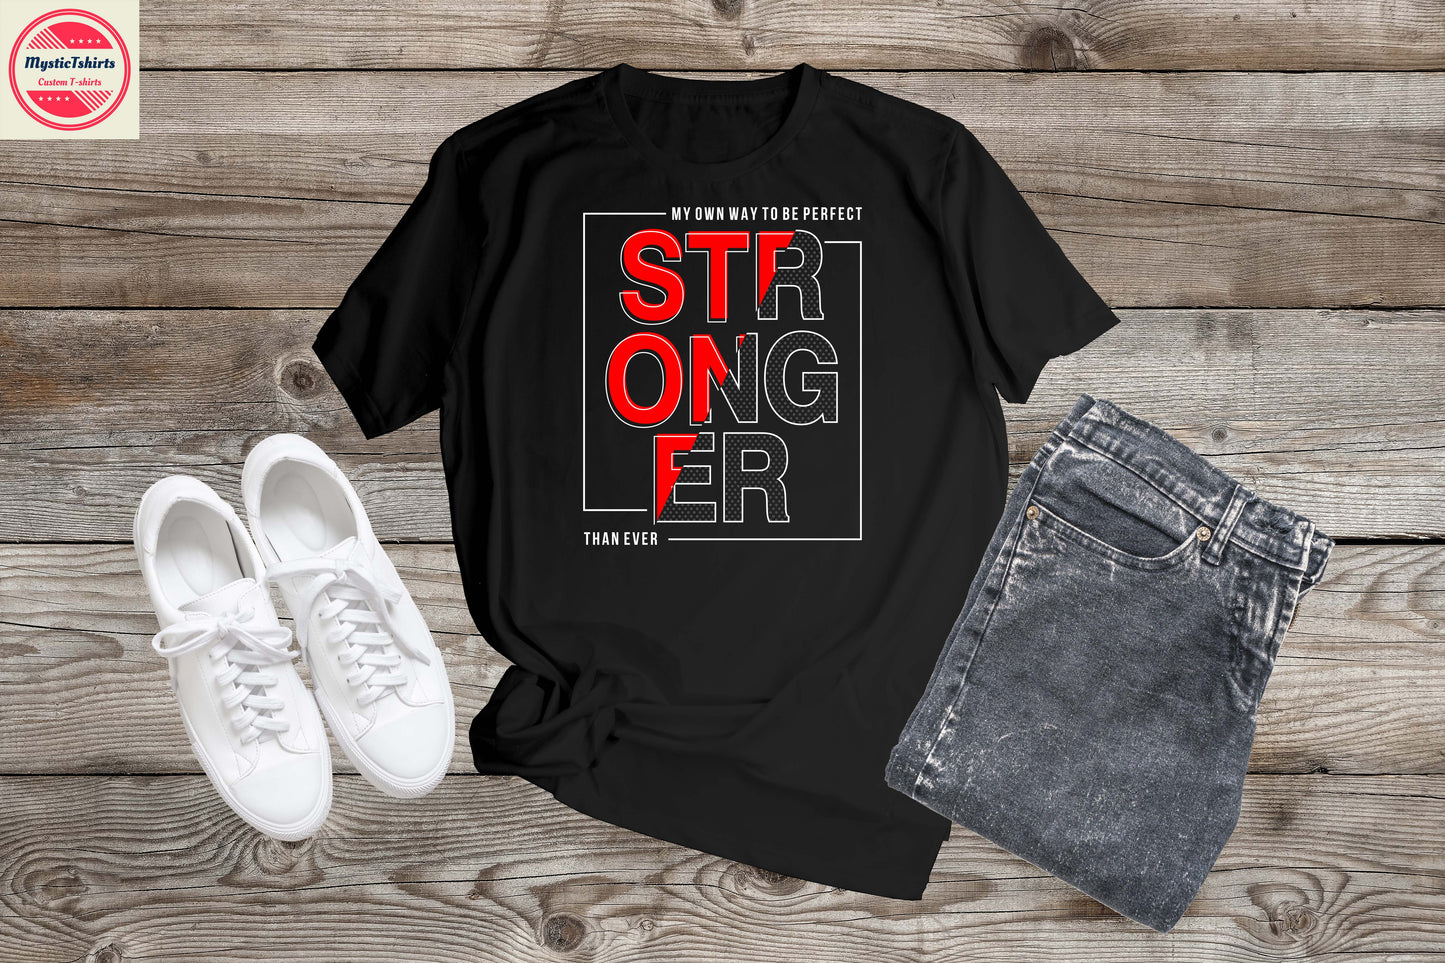 376. MY OWN WAY TO BE PERFECT -STRONGER- THAN EVER, Custom Made Shirt, Personalized T-Shirt, Custom Text, Make Your Own Shirt, Custom Tee